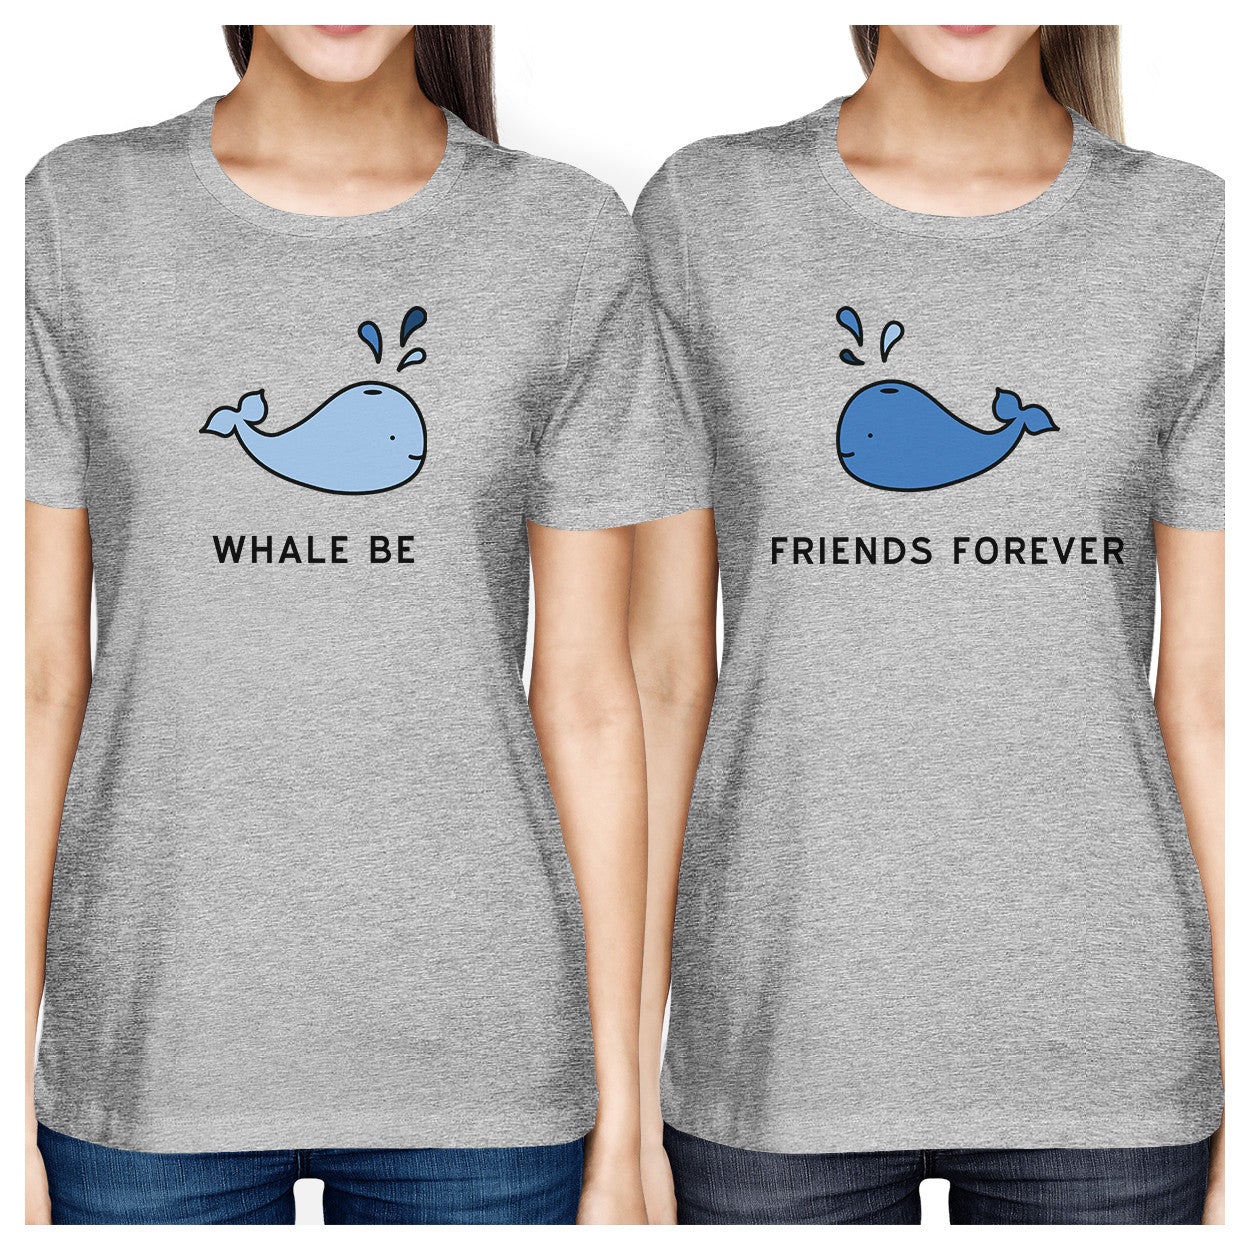 Whale Be Friend Forever Best Friend Matching Grey Cute Graphic Tee